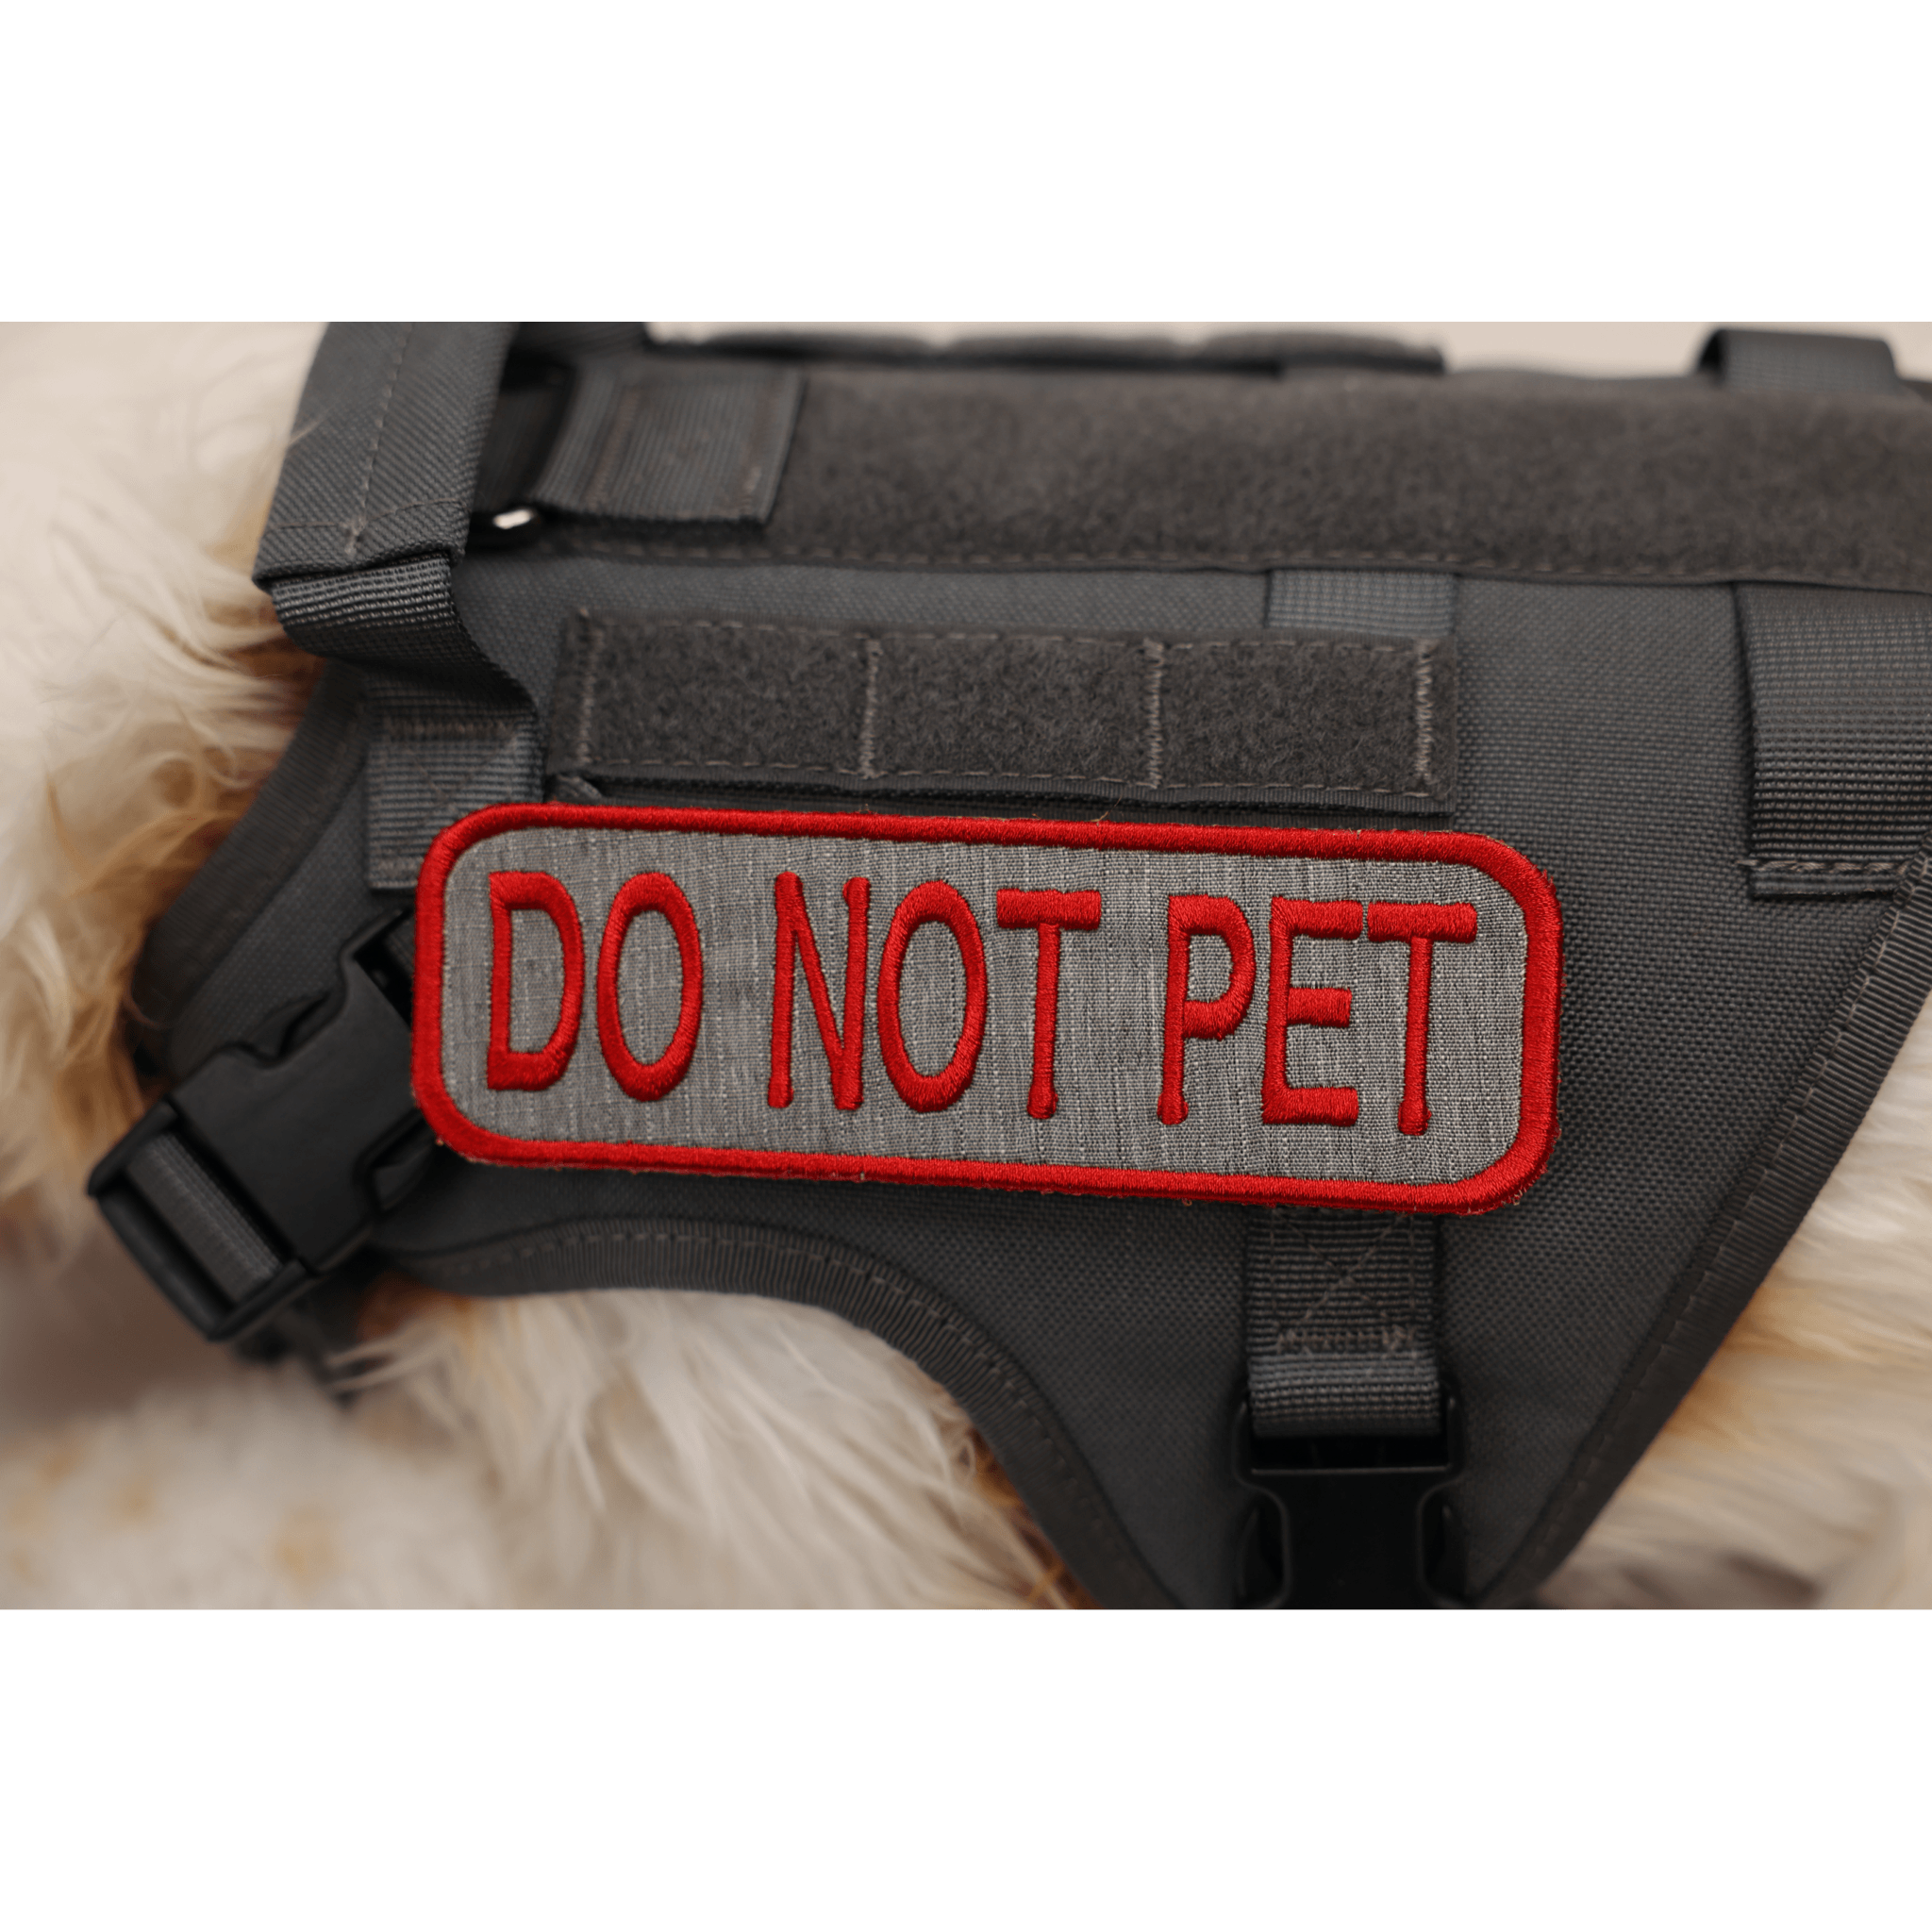 emotional support animal patches